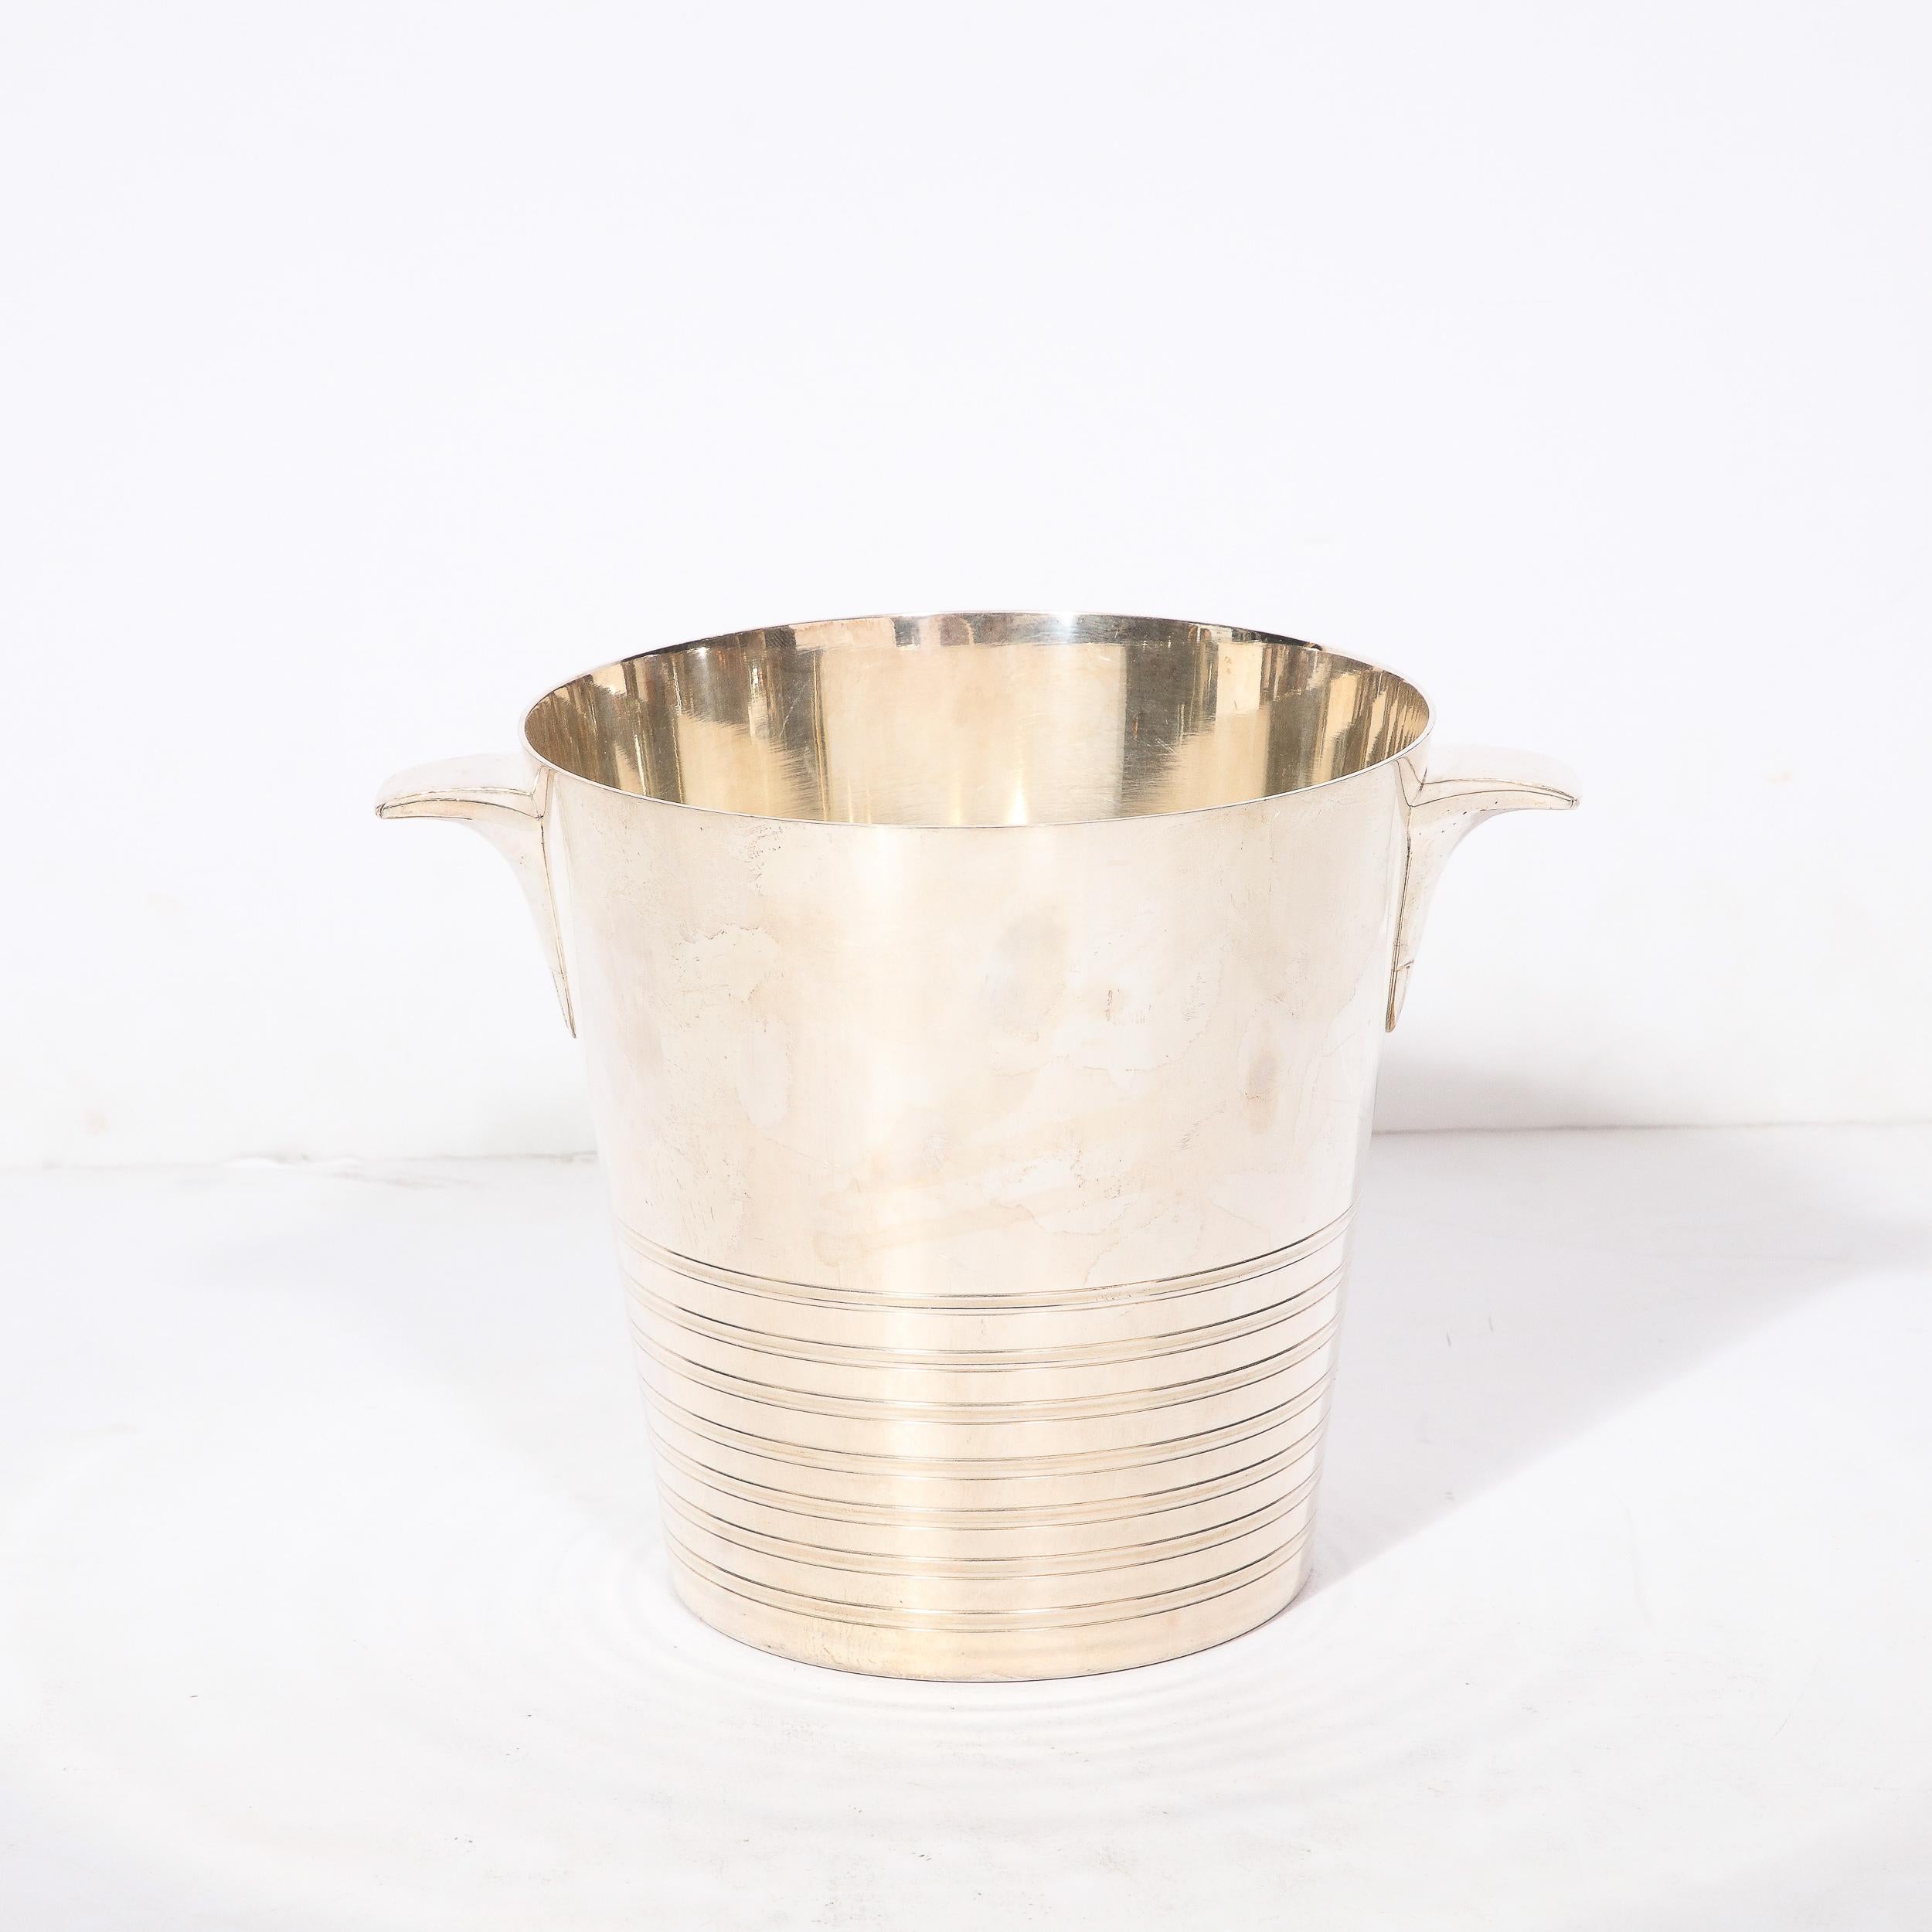 This unique Art Deco Silver Plate Ice Bucket originates from France, Circa 1930. Featuring curved handles that create and elegant swooping silhouette extending outwards from the body of the piece, which on the lower third has precise and radiant